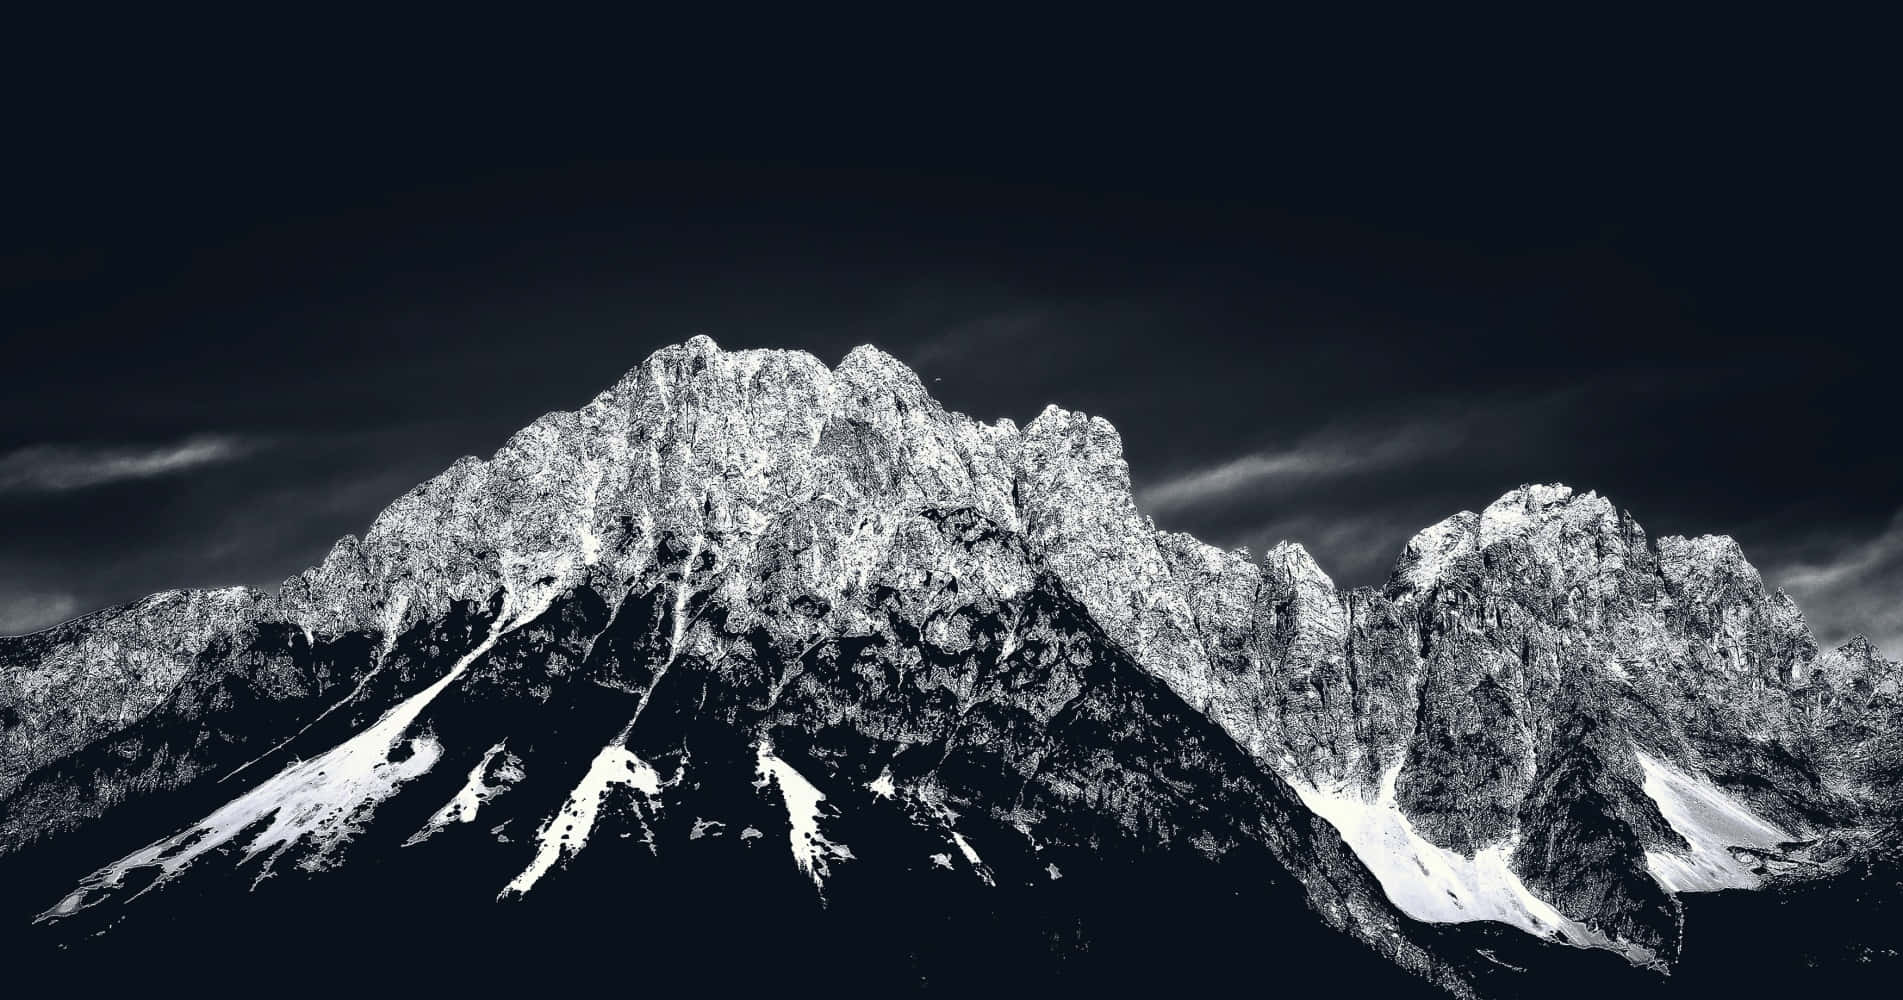 A Black And White Photo Of Mountains